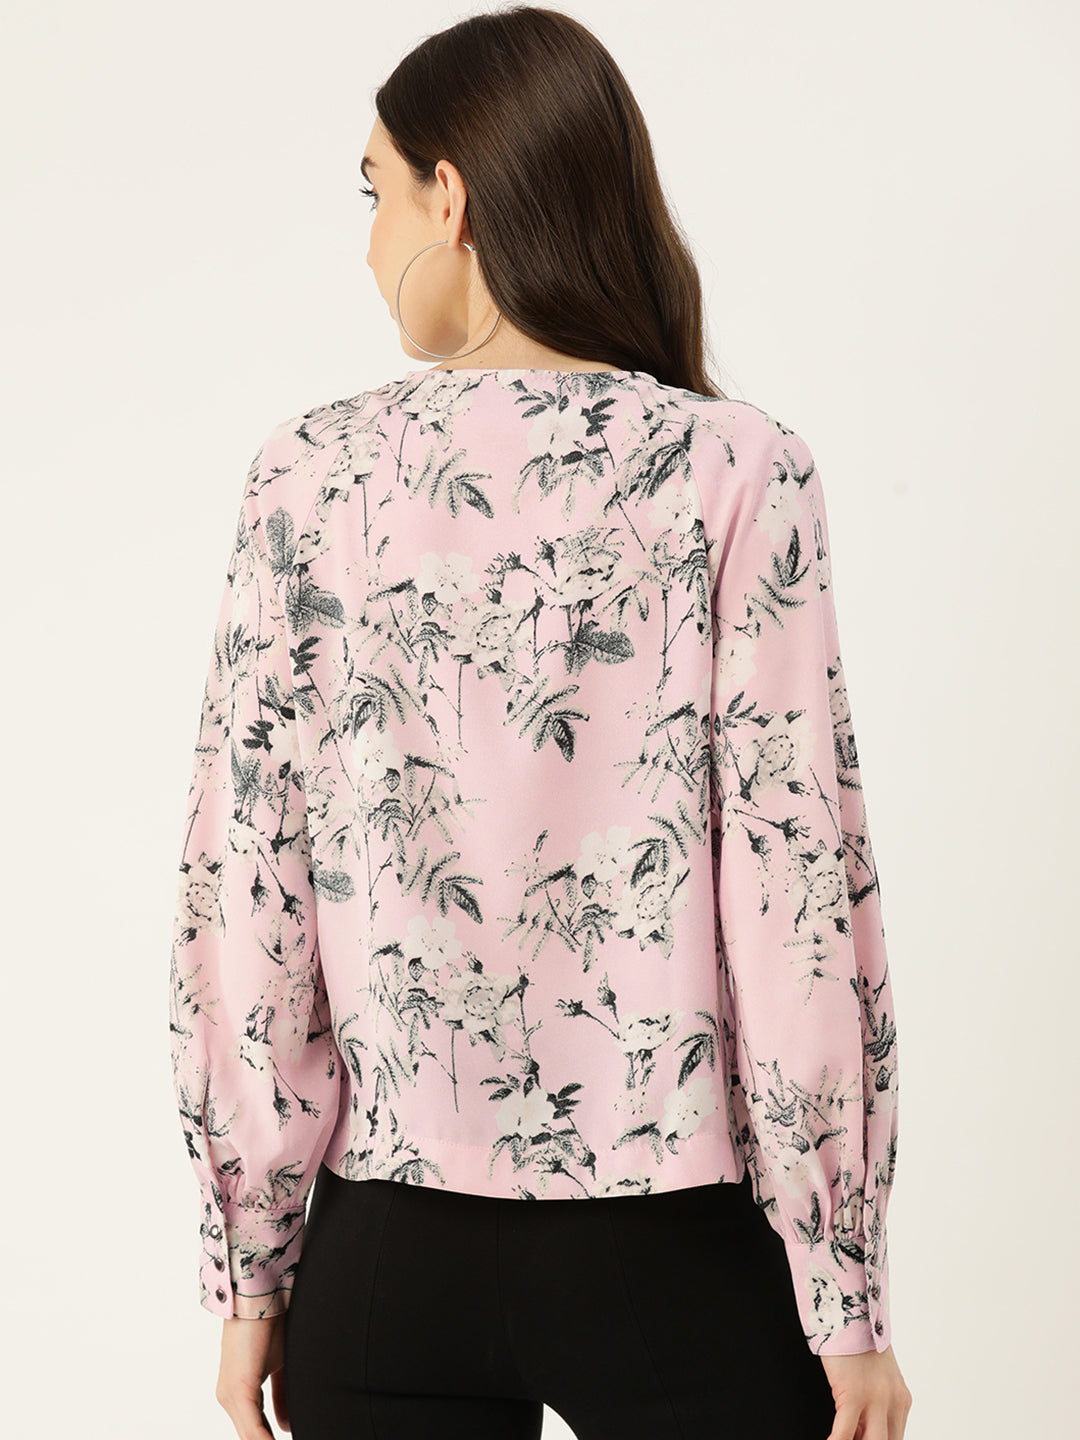 Floral Print Keyhole Neck Puff Sleeve Top